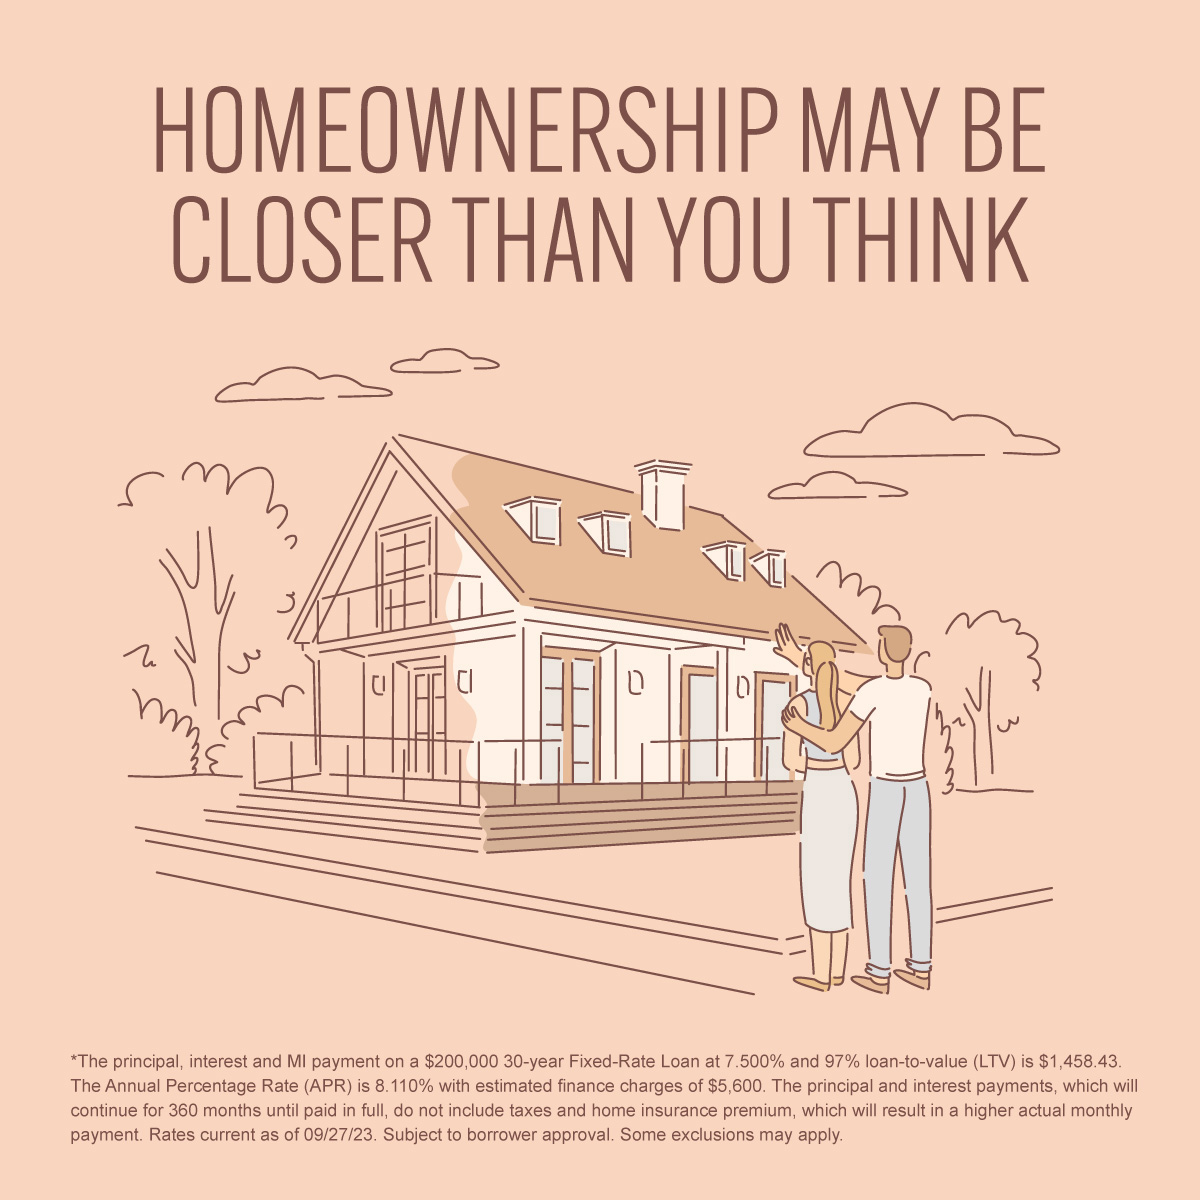 There’s a misconception out there that you need 20% down to purchase a new home — that is simply not true! In fact, you may need as little as just 3% down. Call me today and let’s discuss your options. #firsttimehomebuyer #homeloan #downpayment